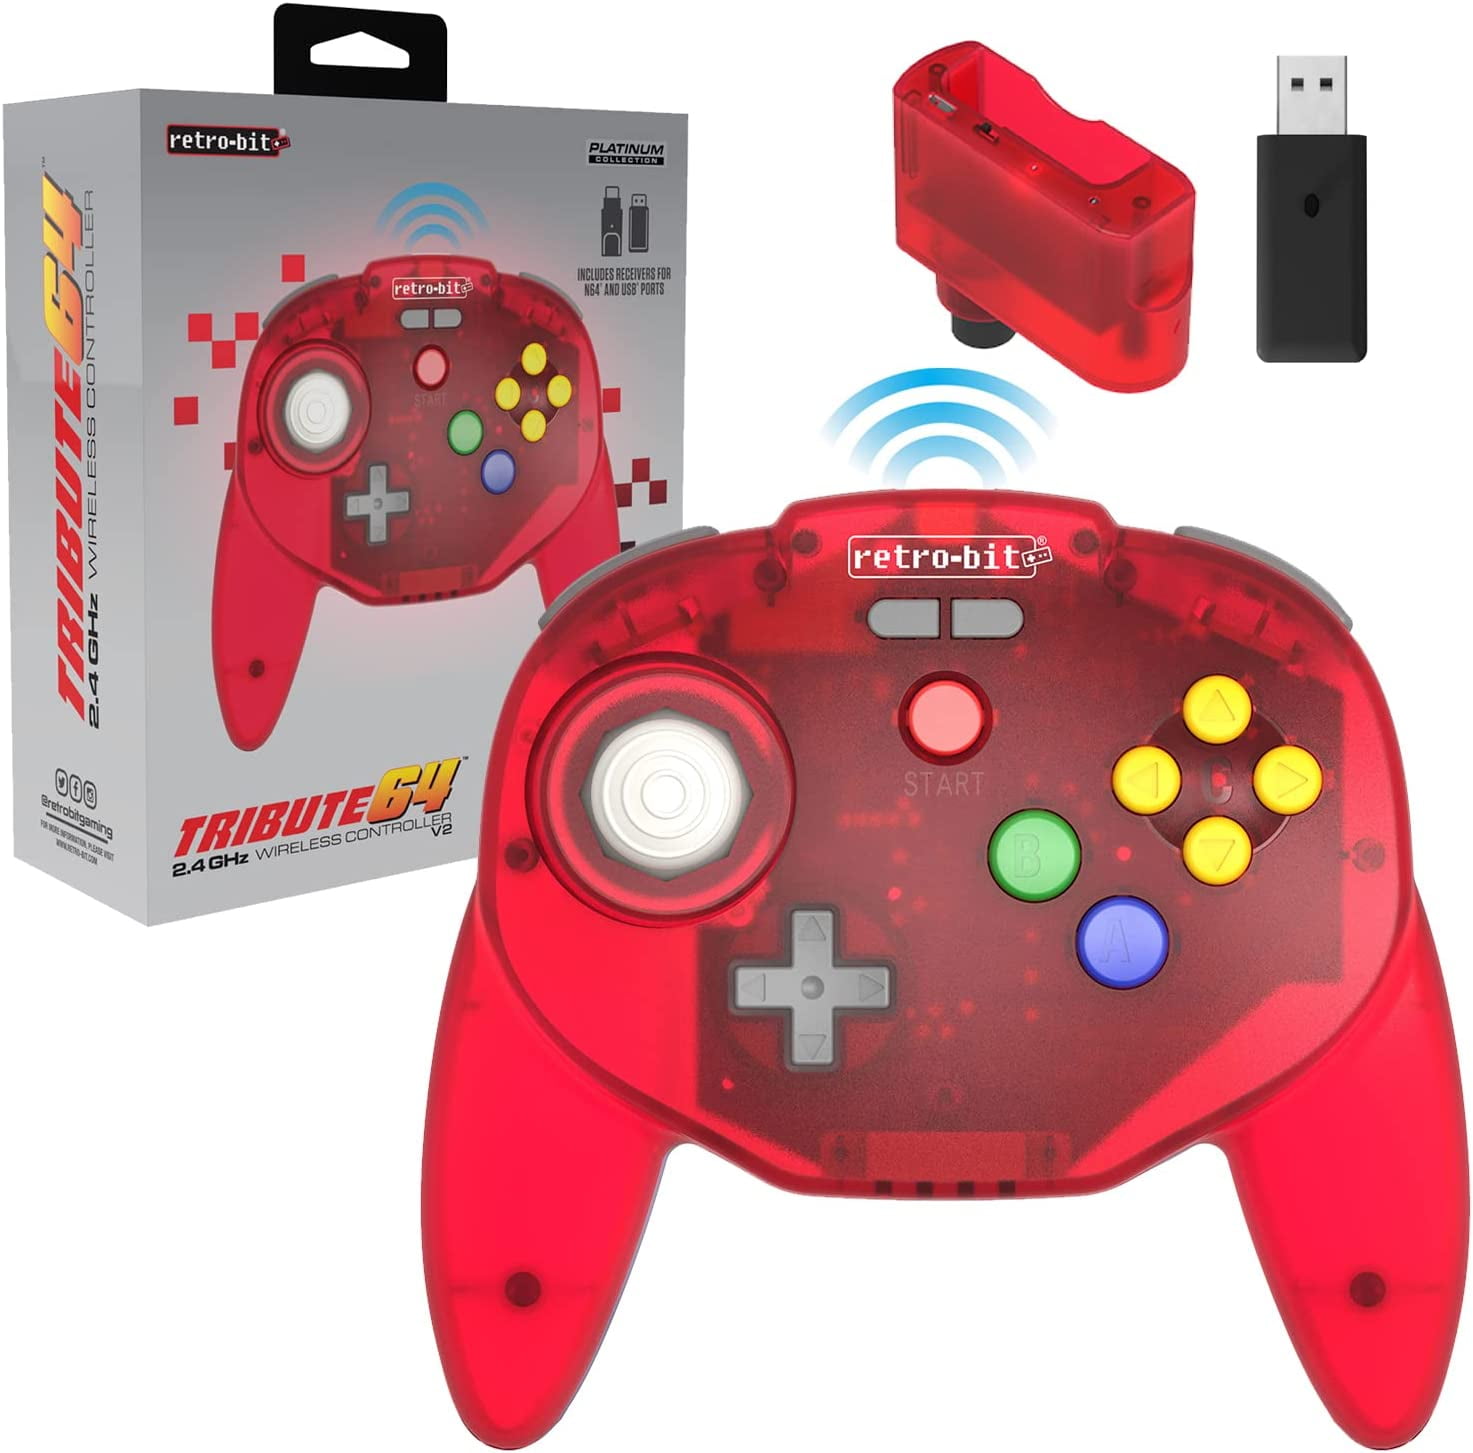 Retro-Bit Tribute64 2.4GHz Wireless Controller for Nintendo 64 (N64),  Switch, PC, MacOS, RetroPie, Raspberry Pi and Other USB Devices (Clear Red)  